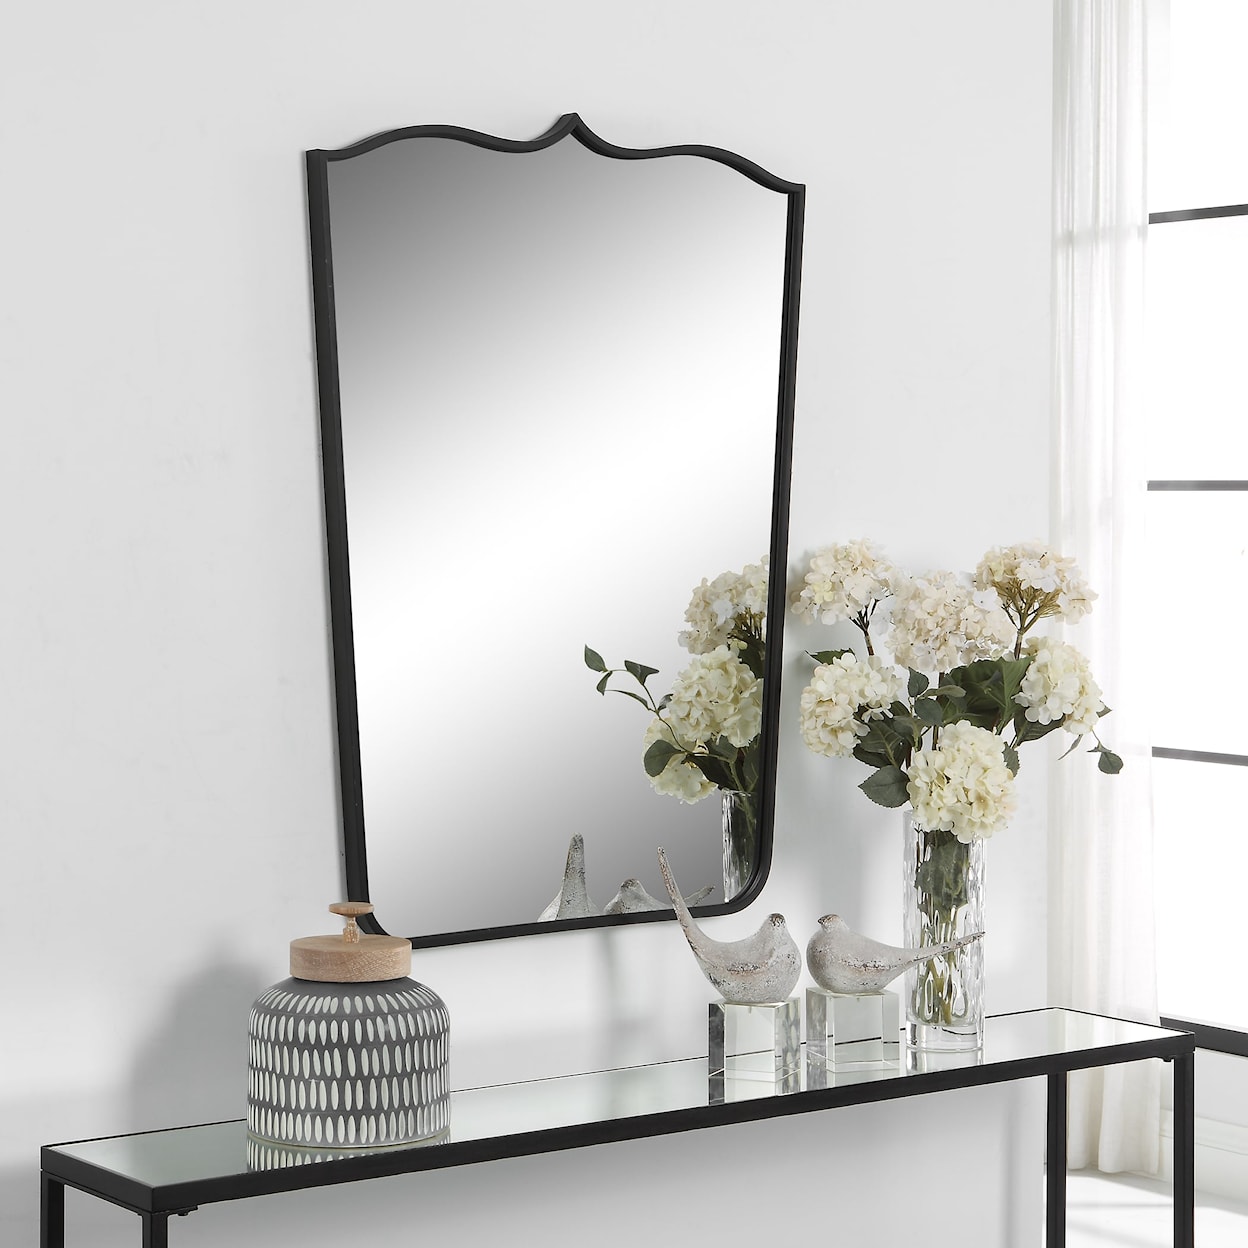 Uttermost Tiara Curved Iron Wall Mirror